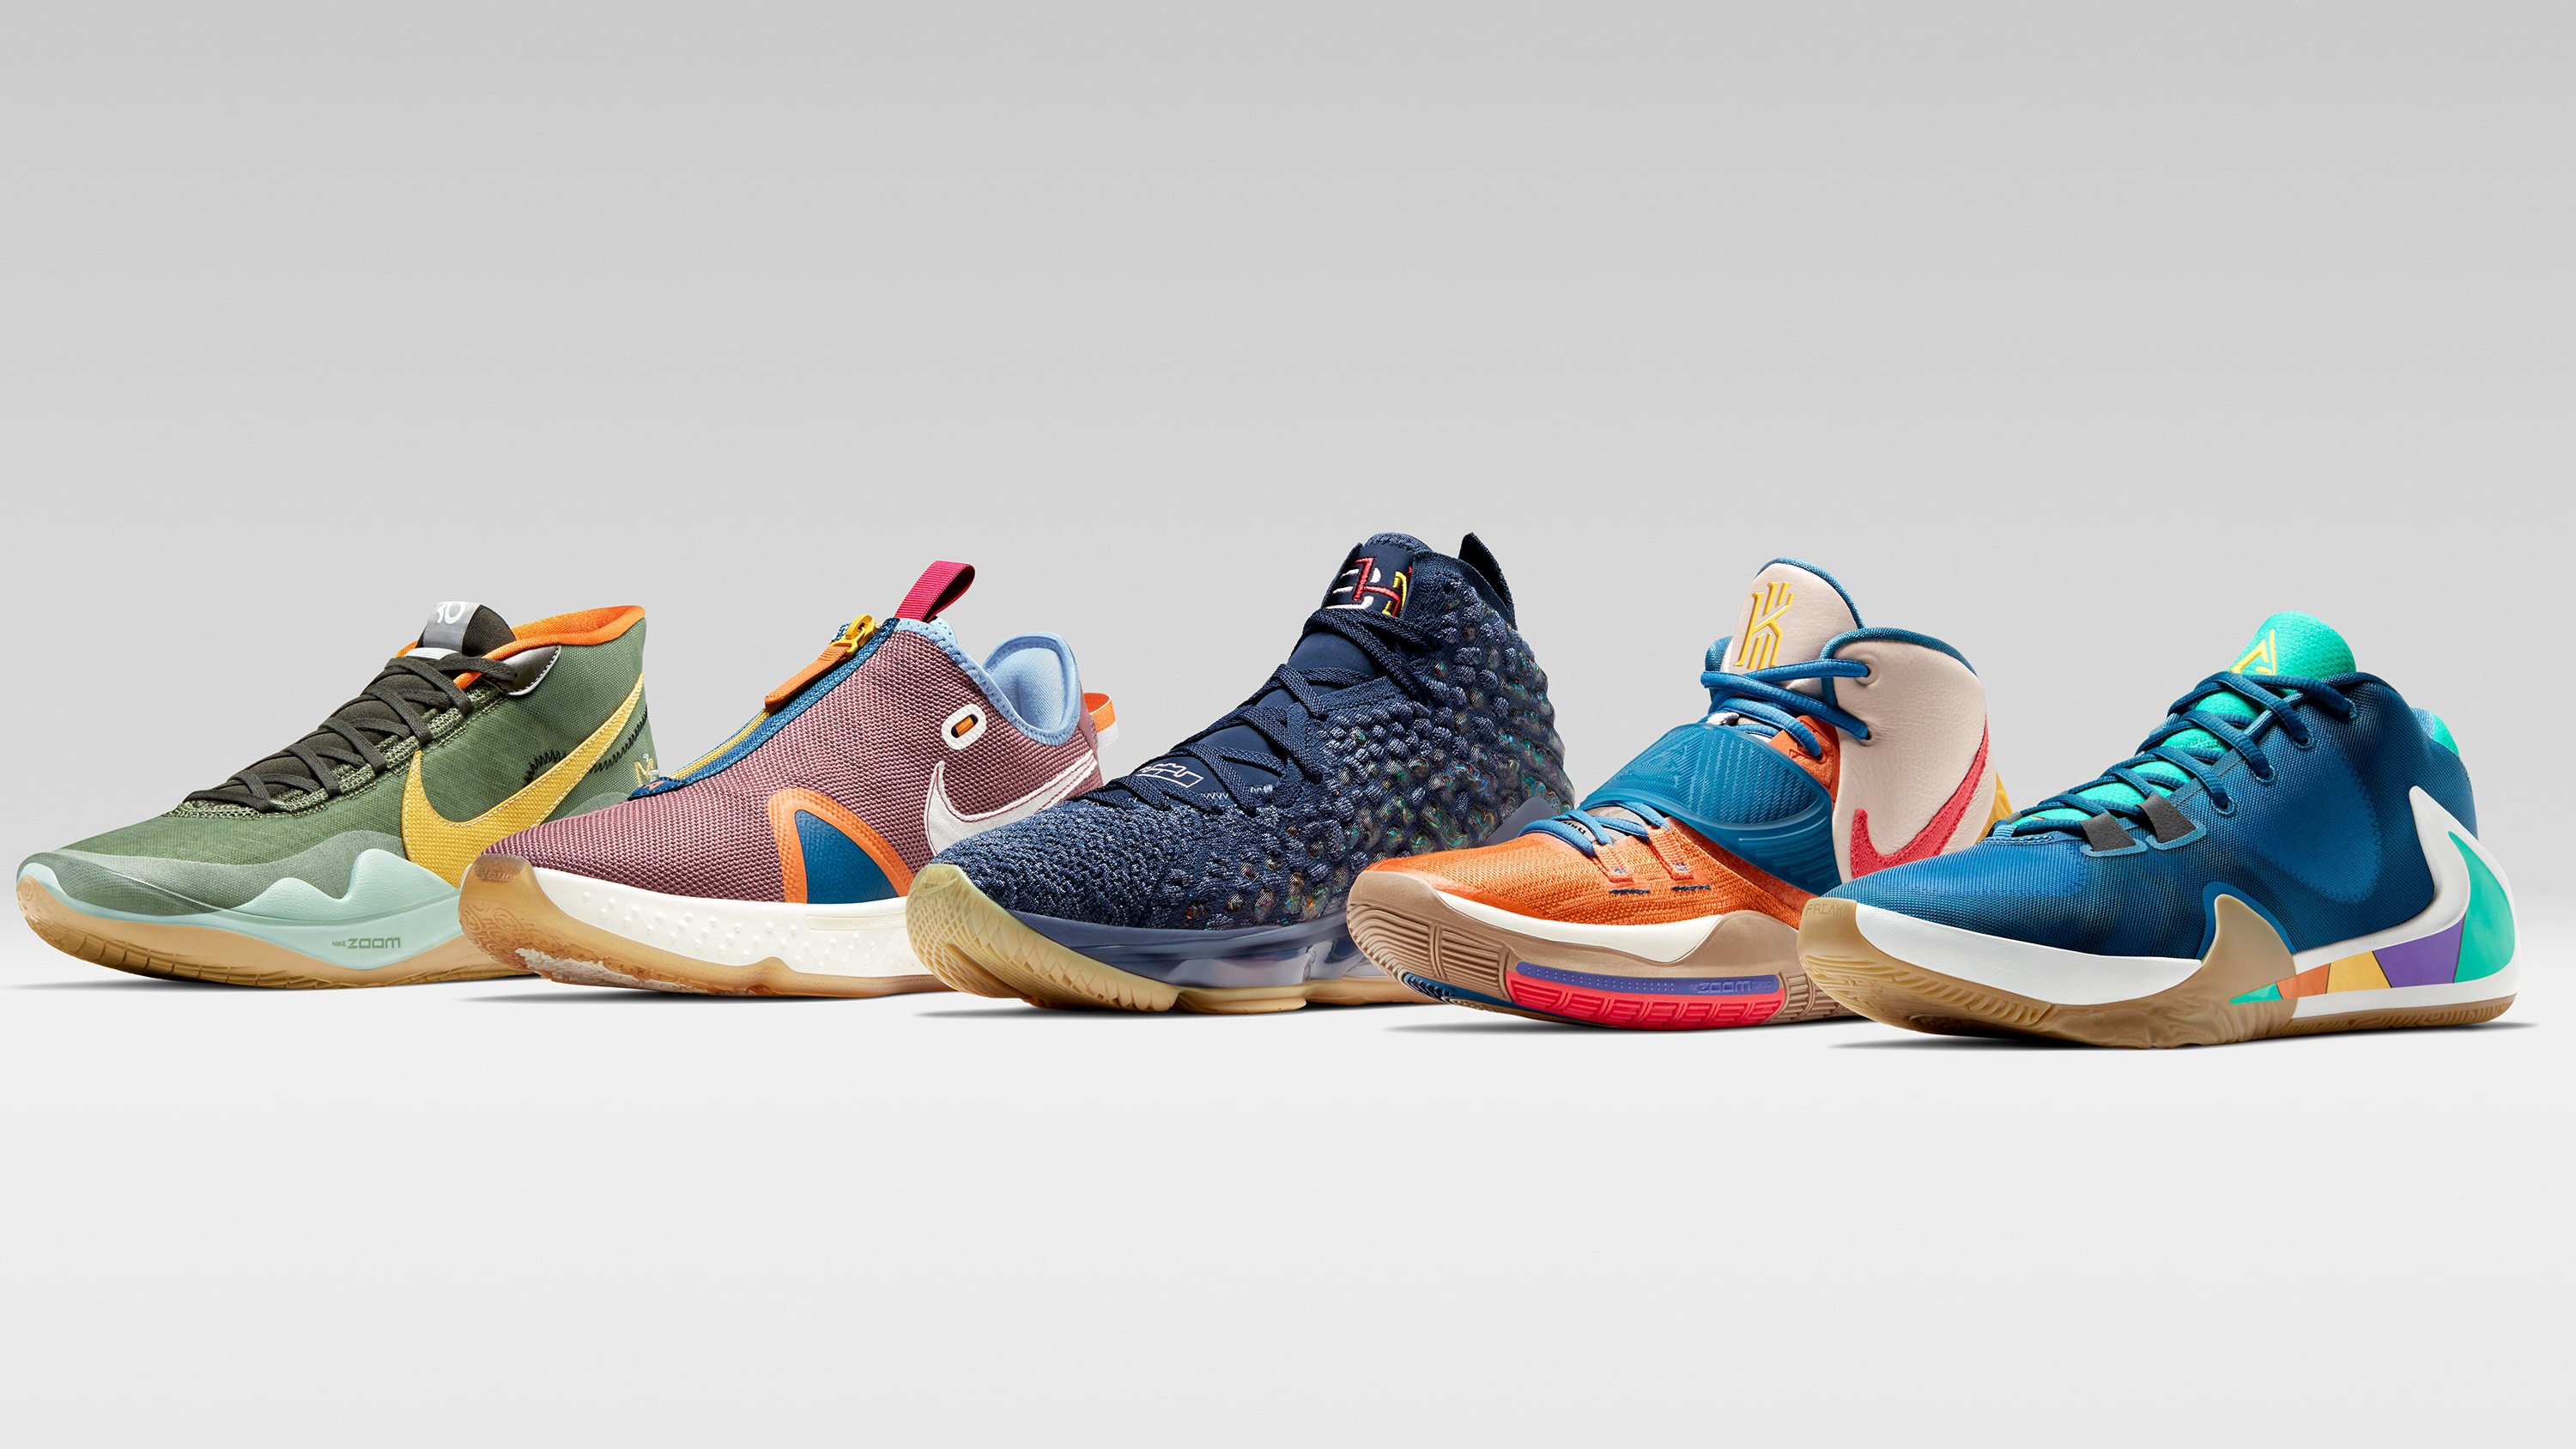 Nike Basketball 'Black History Month' 2020 PE Collection | Sole Collector